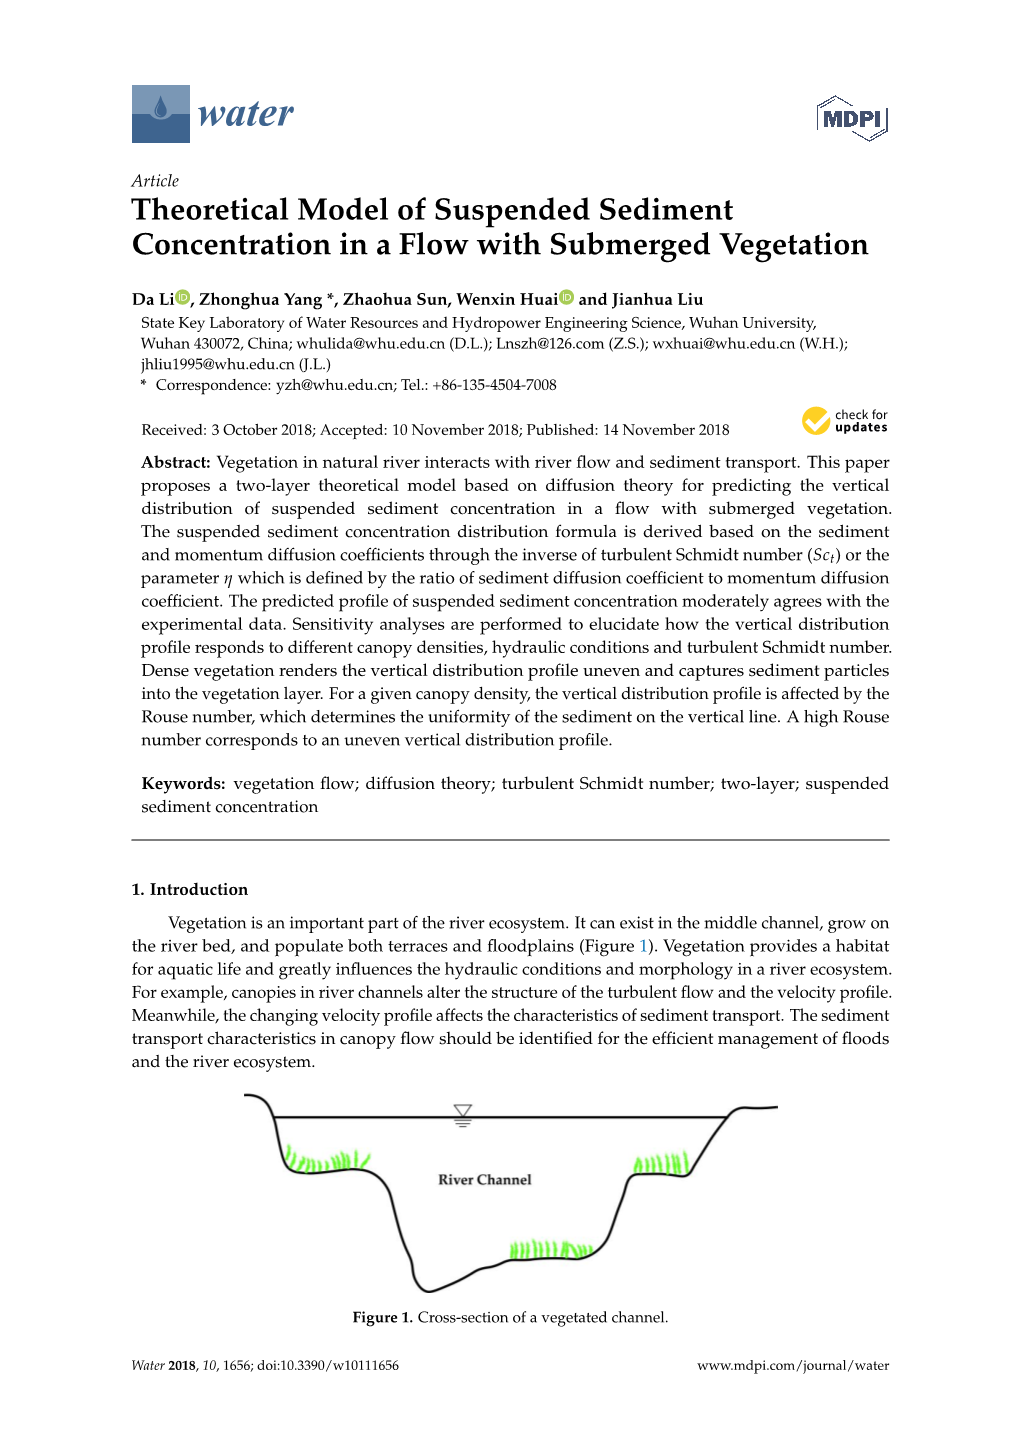 Theoretical Model of Suspended Sediment Concentration in a Flow with Submerged Vegetation